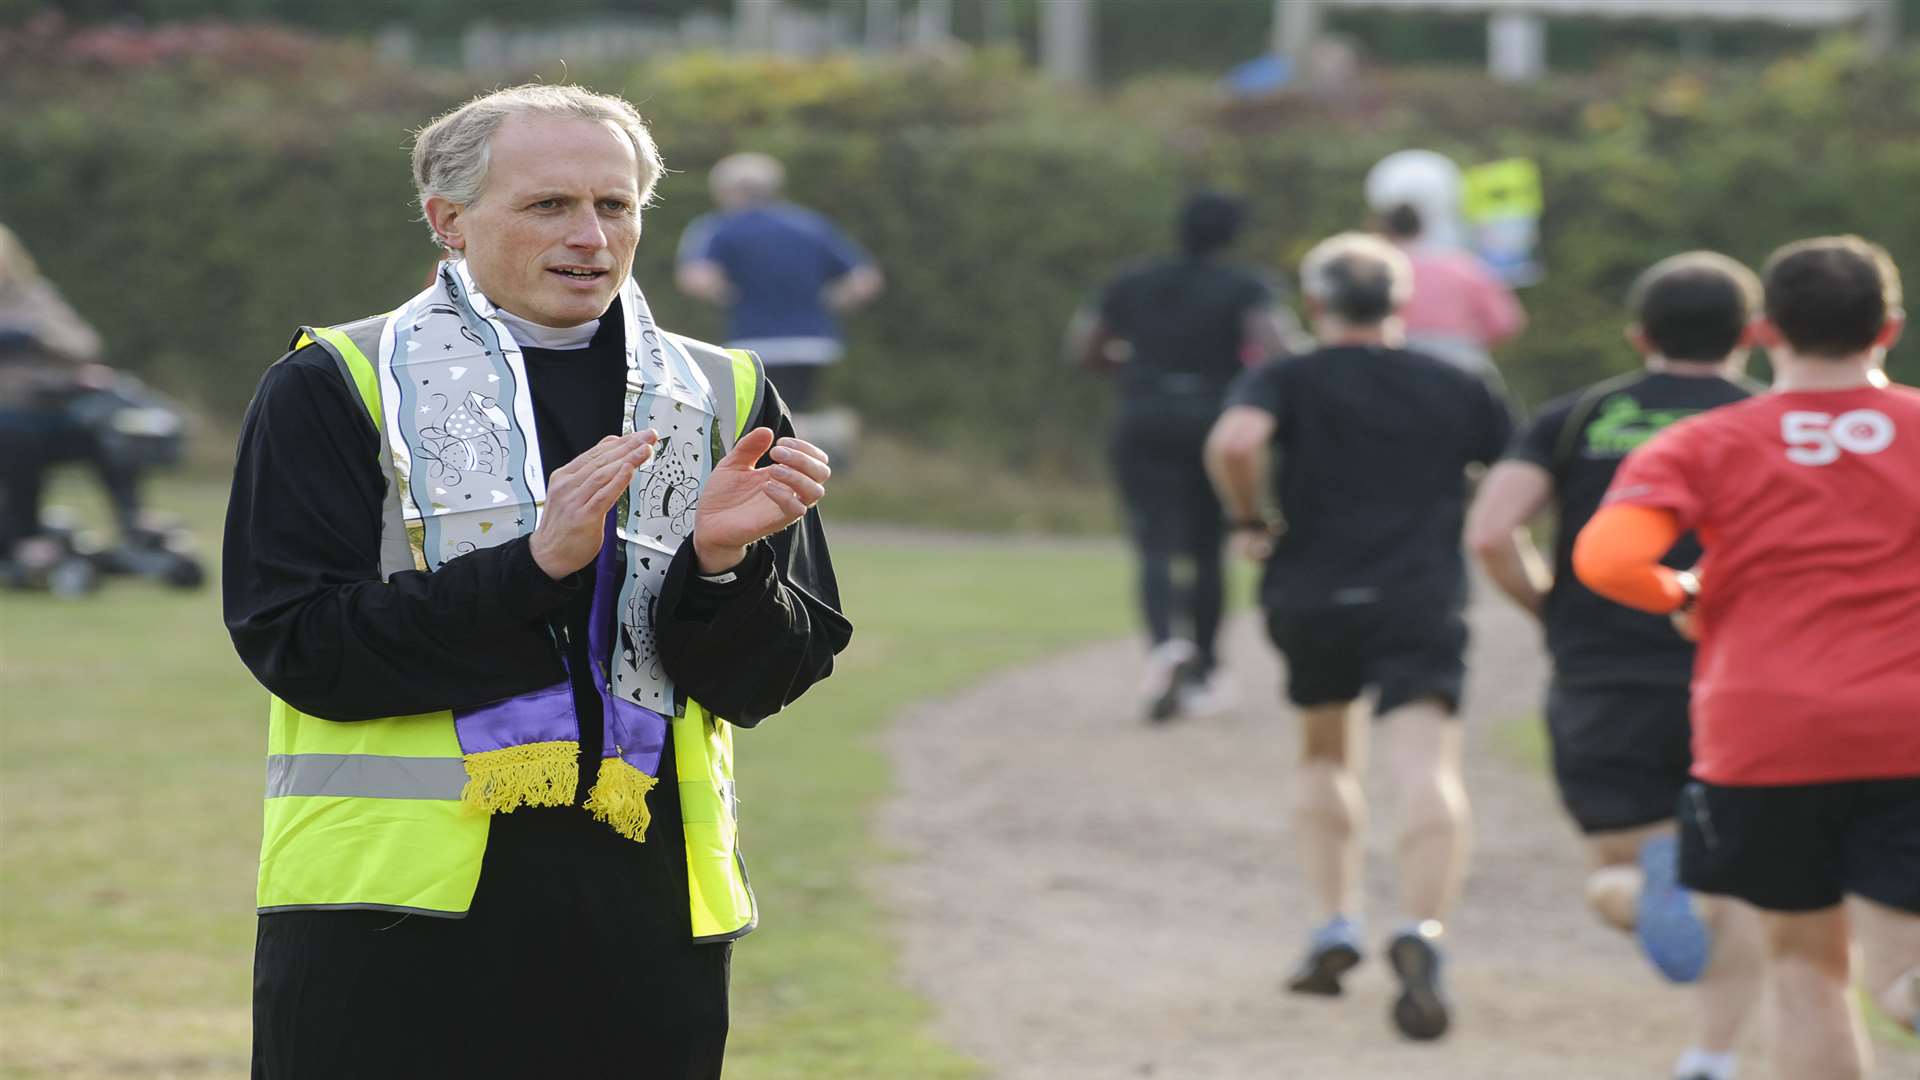 'Vicar" Jonathan Crowle cheers the runners on. Picture: Andy Payton